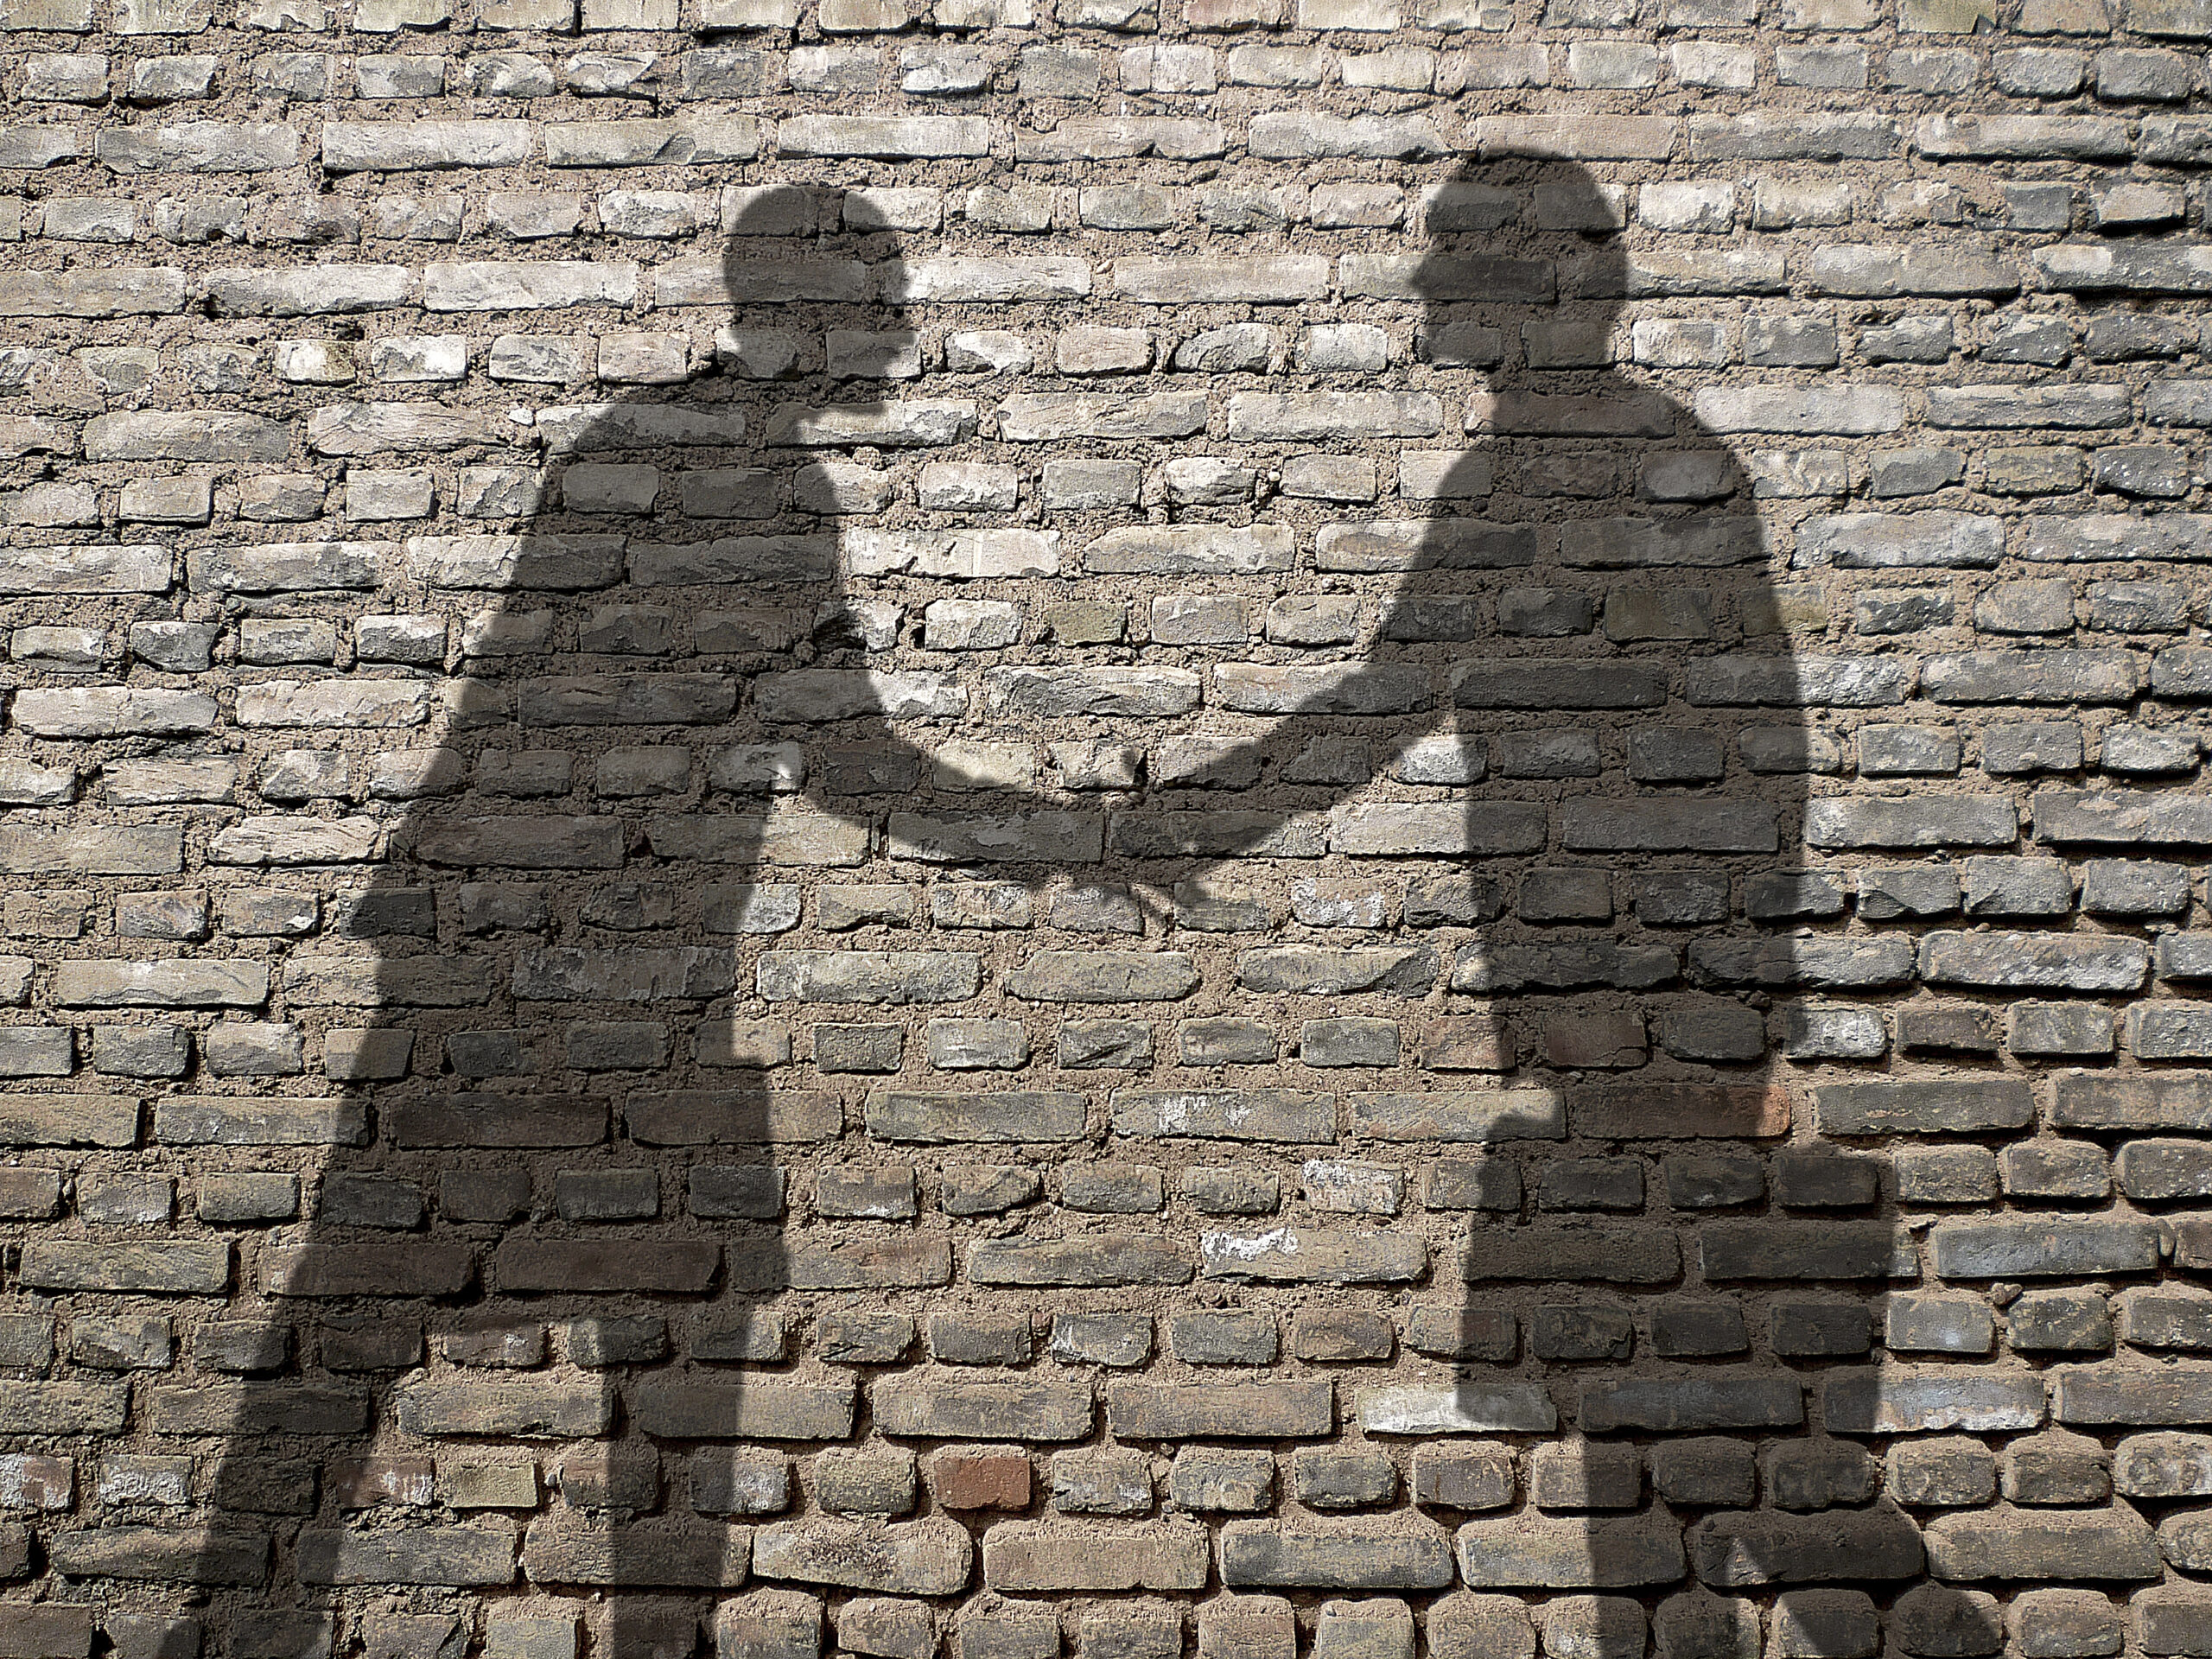 Shadow of two men shaking hands